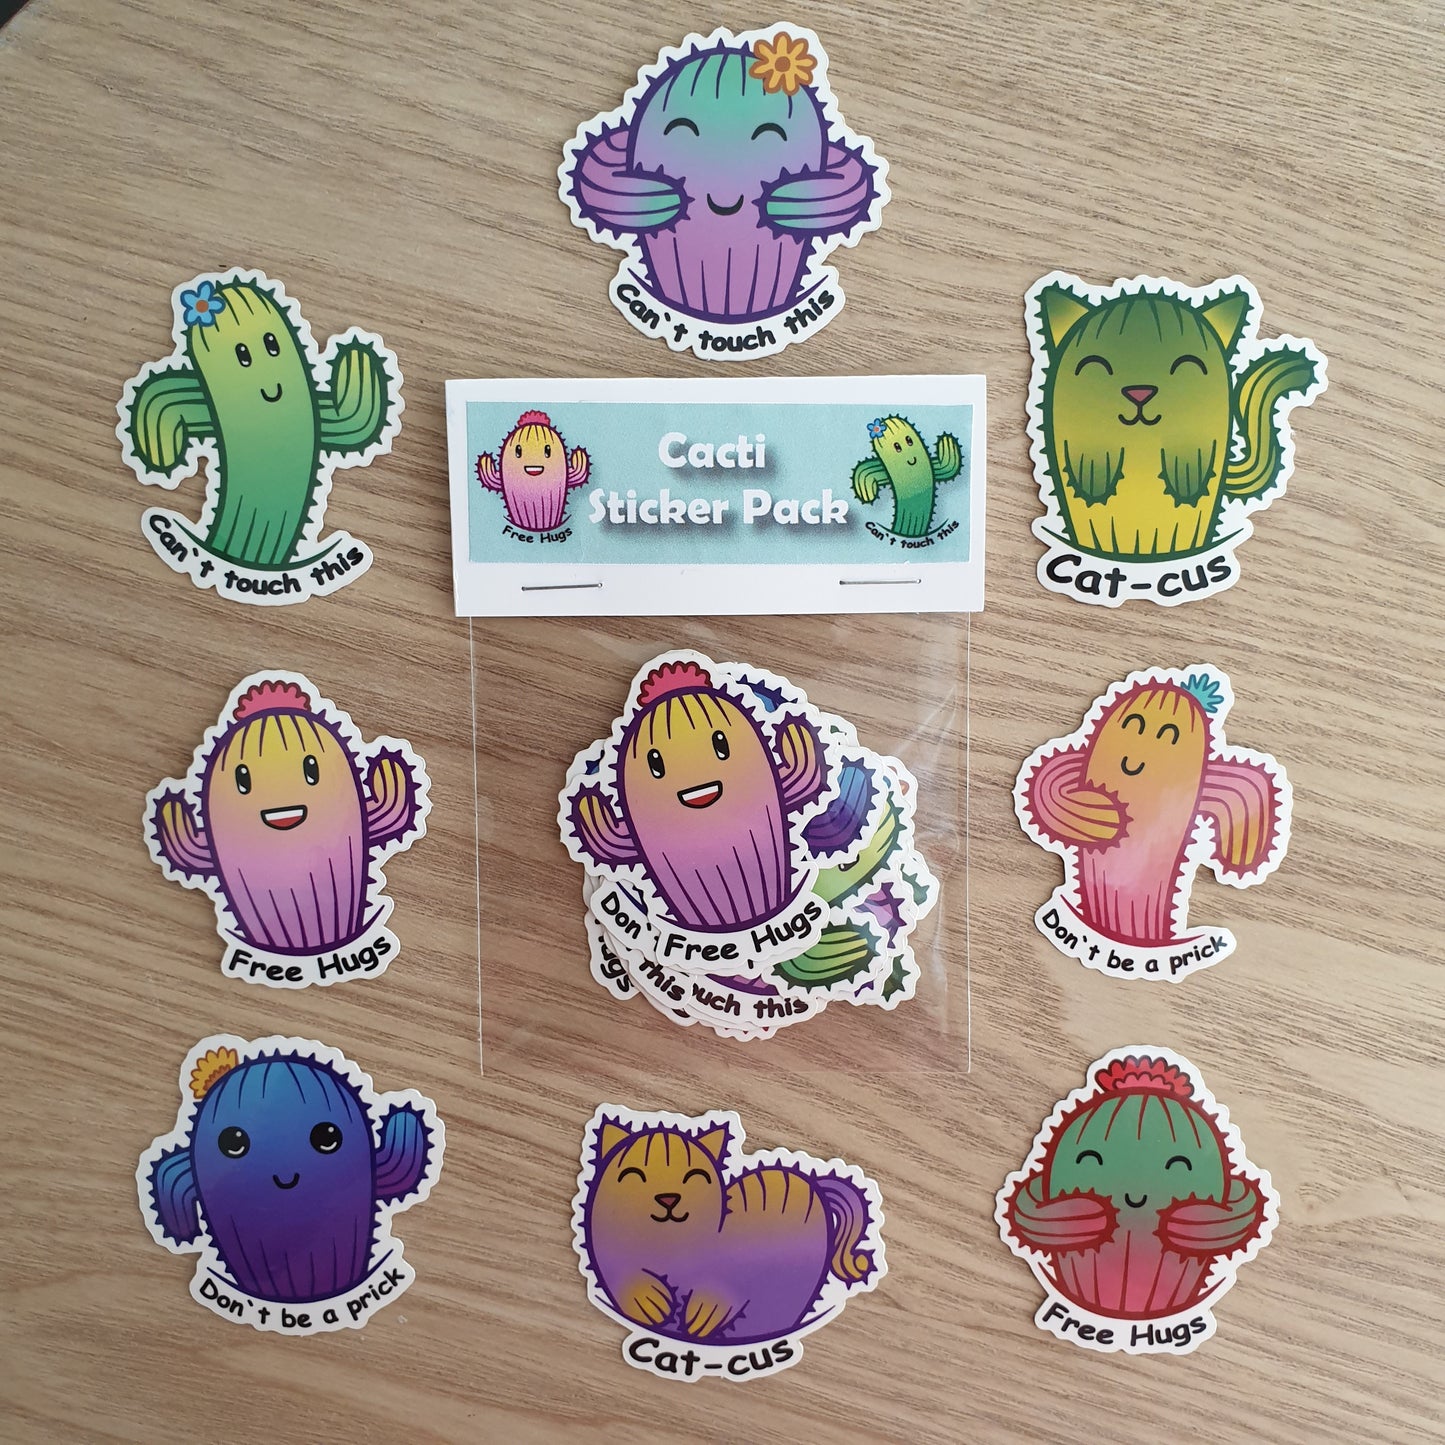 Cactus Sticker - "Cat-cus" - green and yellow